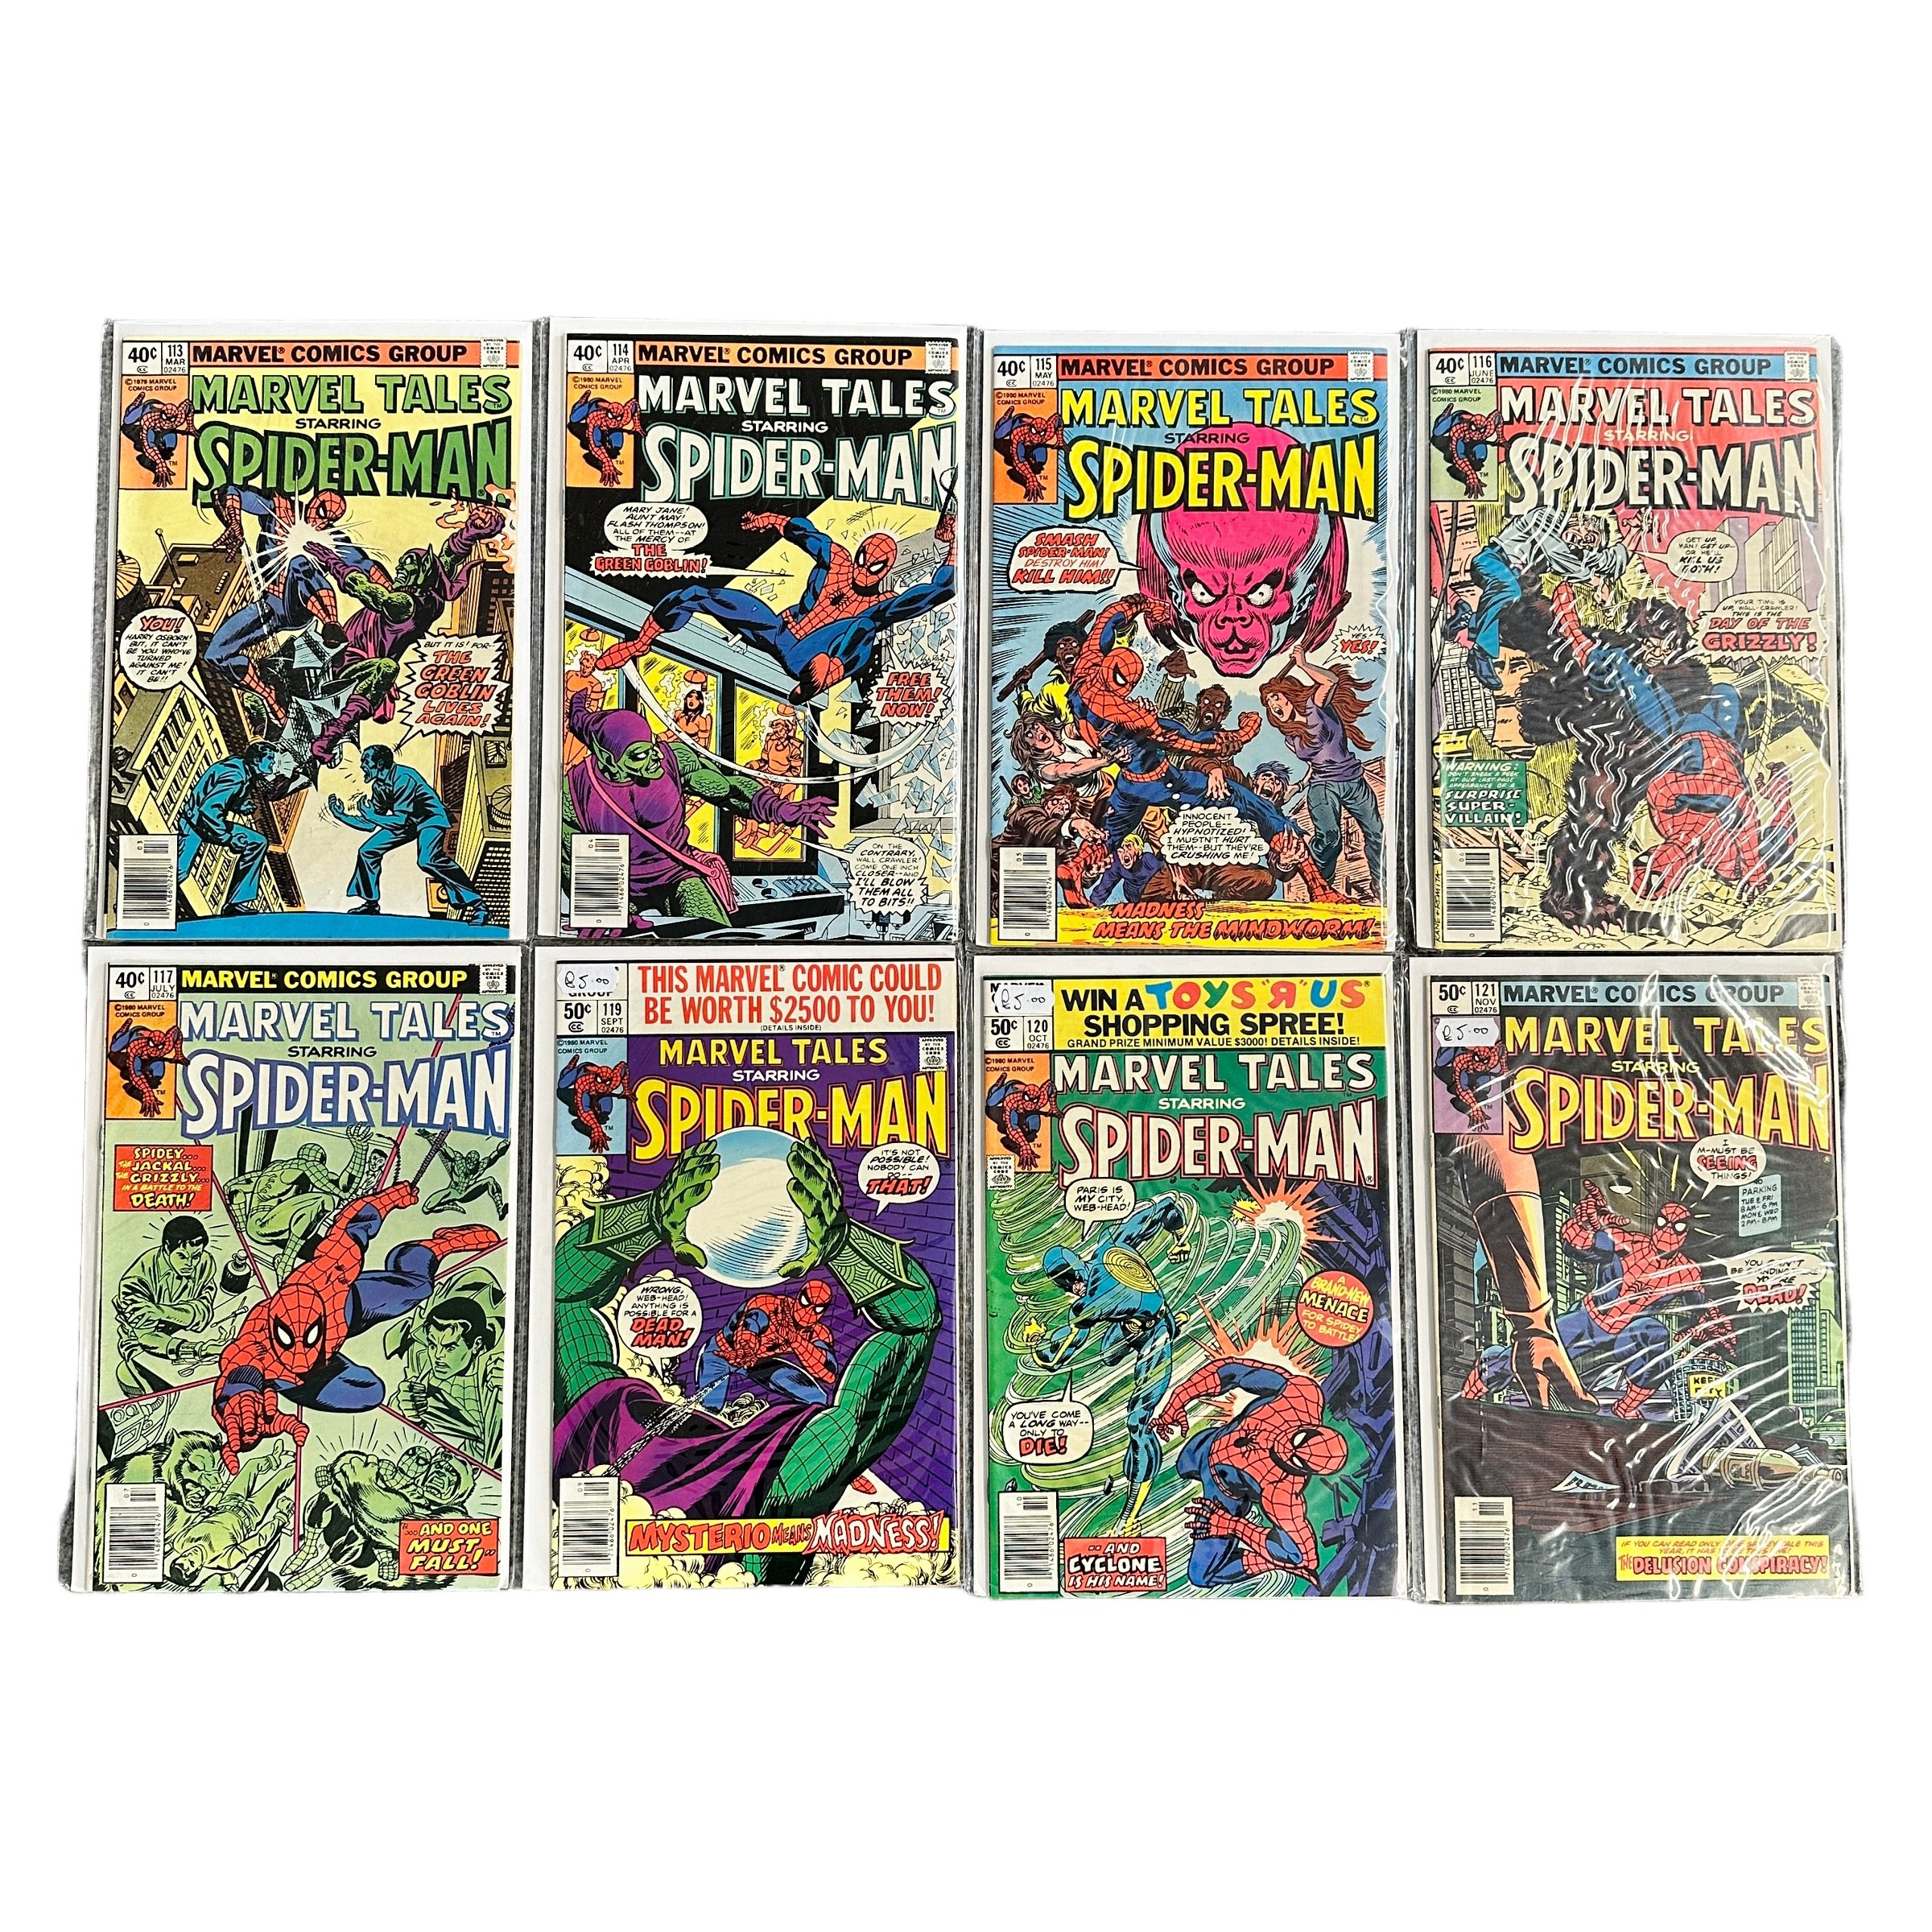 Marvel Tales Spider-Man 1970s Nos 95-97, 101-105, 108-111, 113-117, 119-121: All 20 comics are - Image 2 of 2